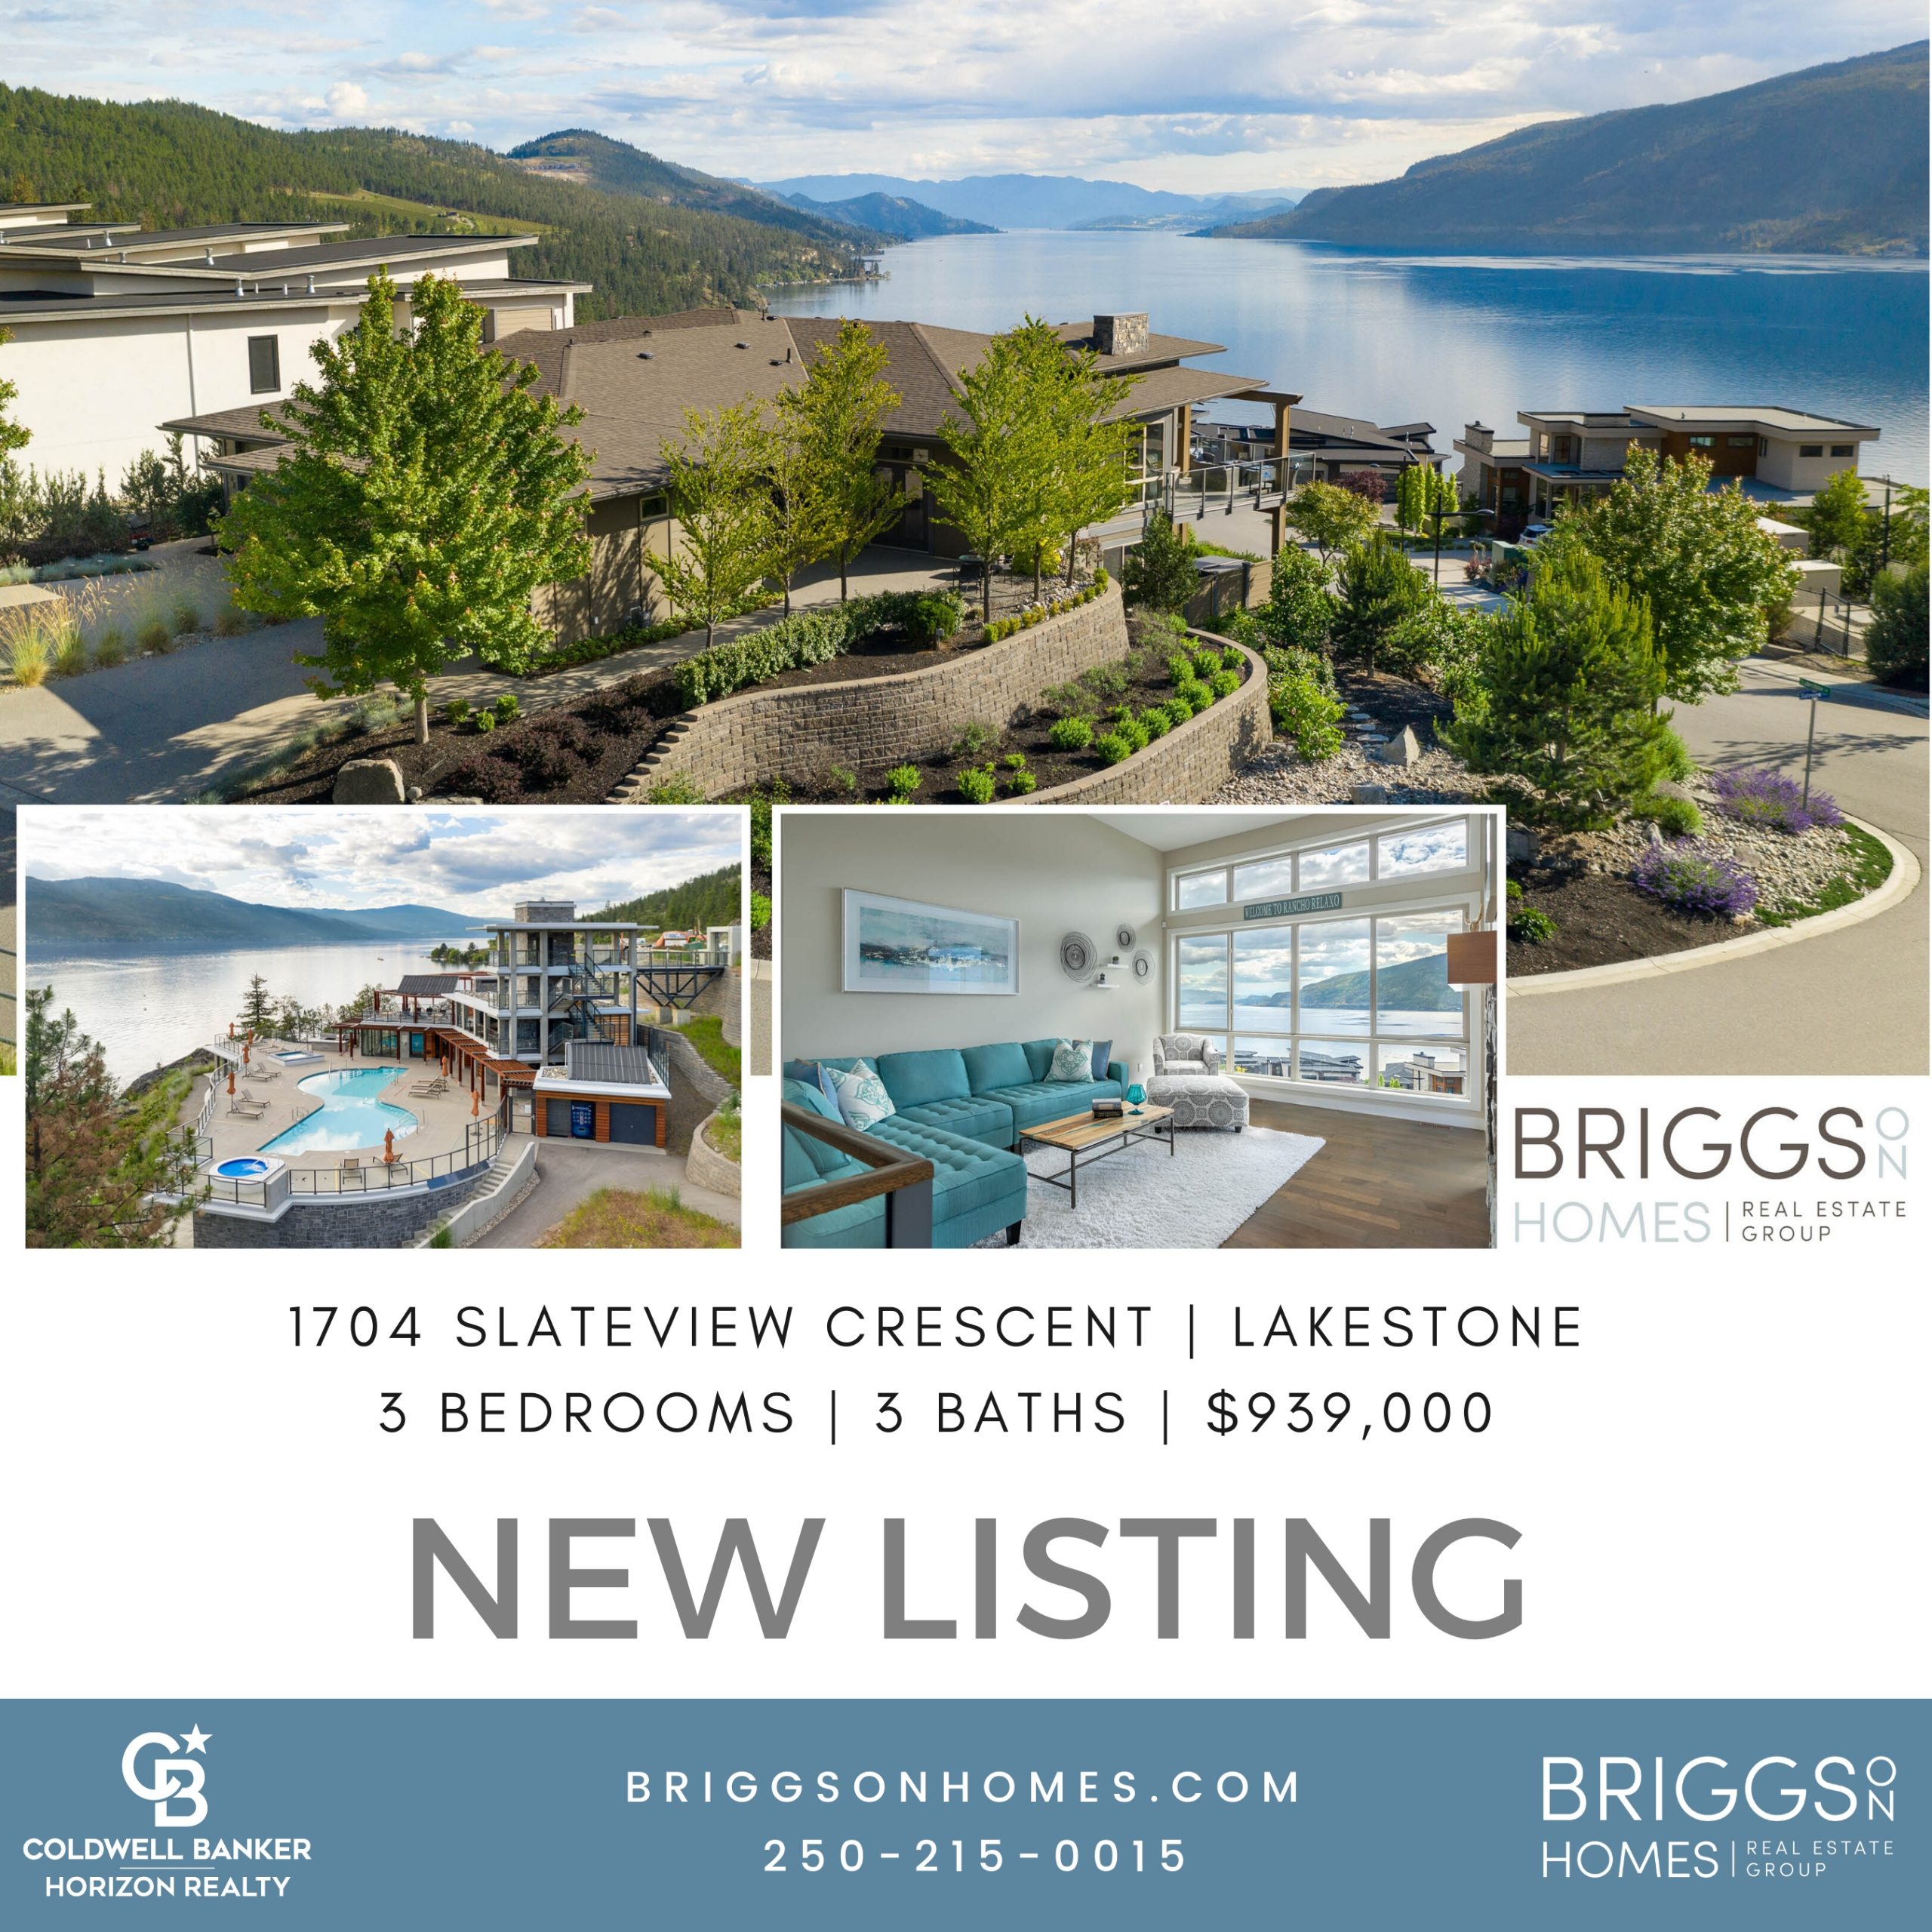 Just Listed! Stunning Views from Both Levels at Lakestone